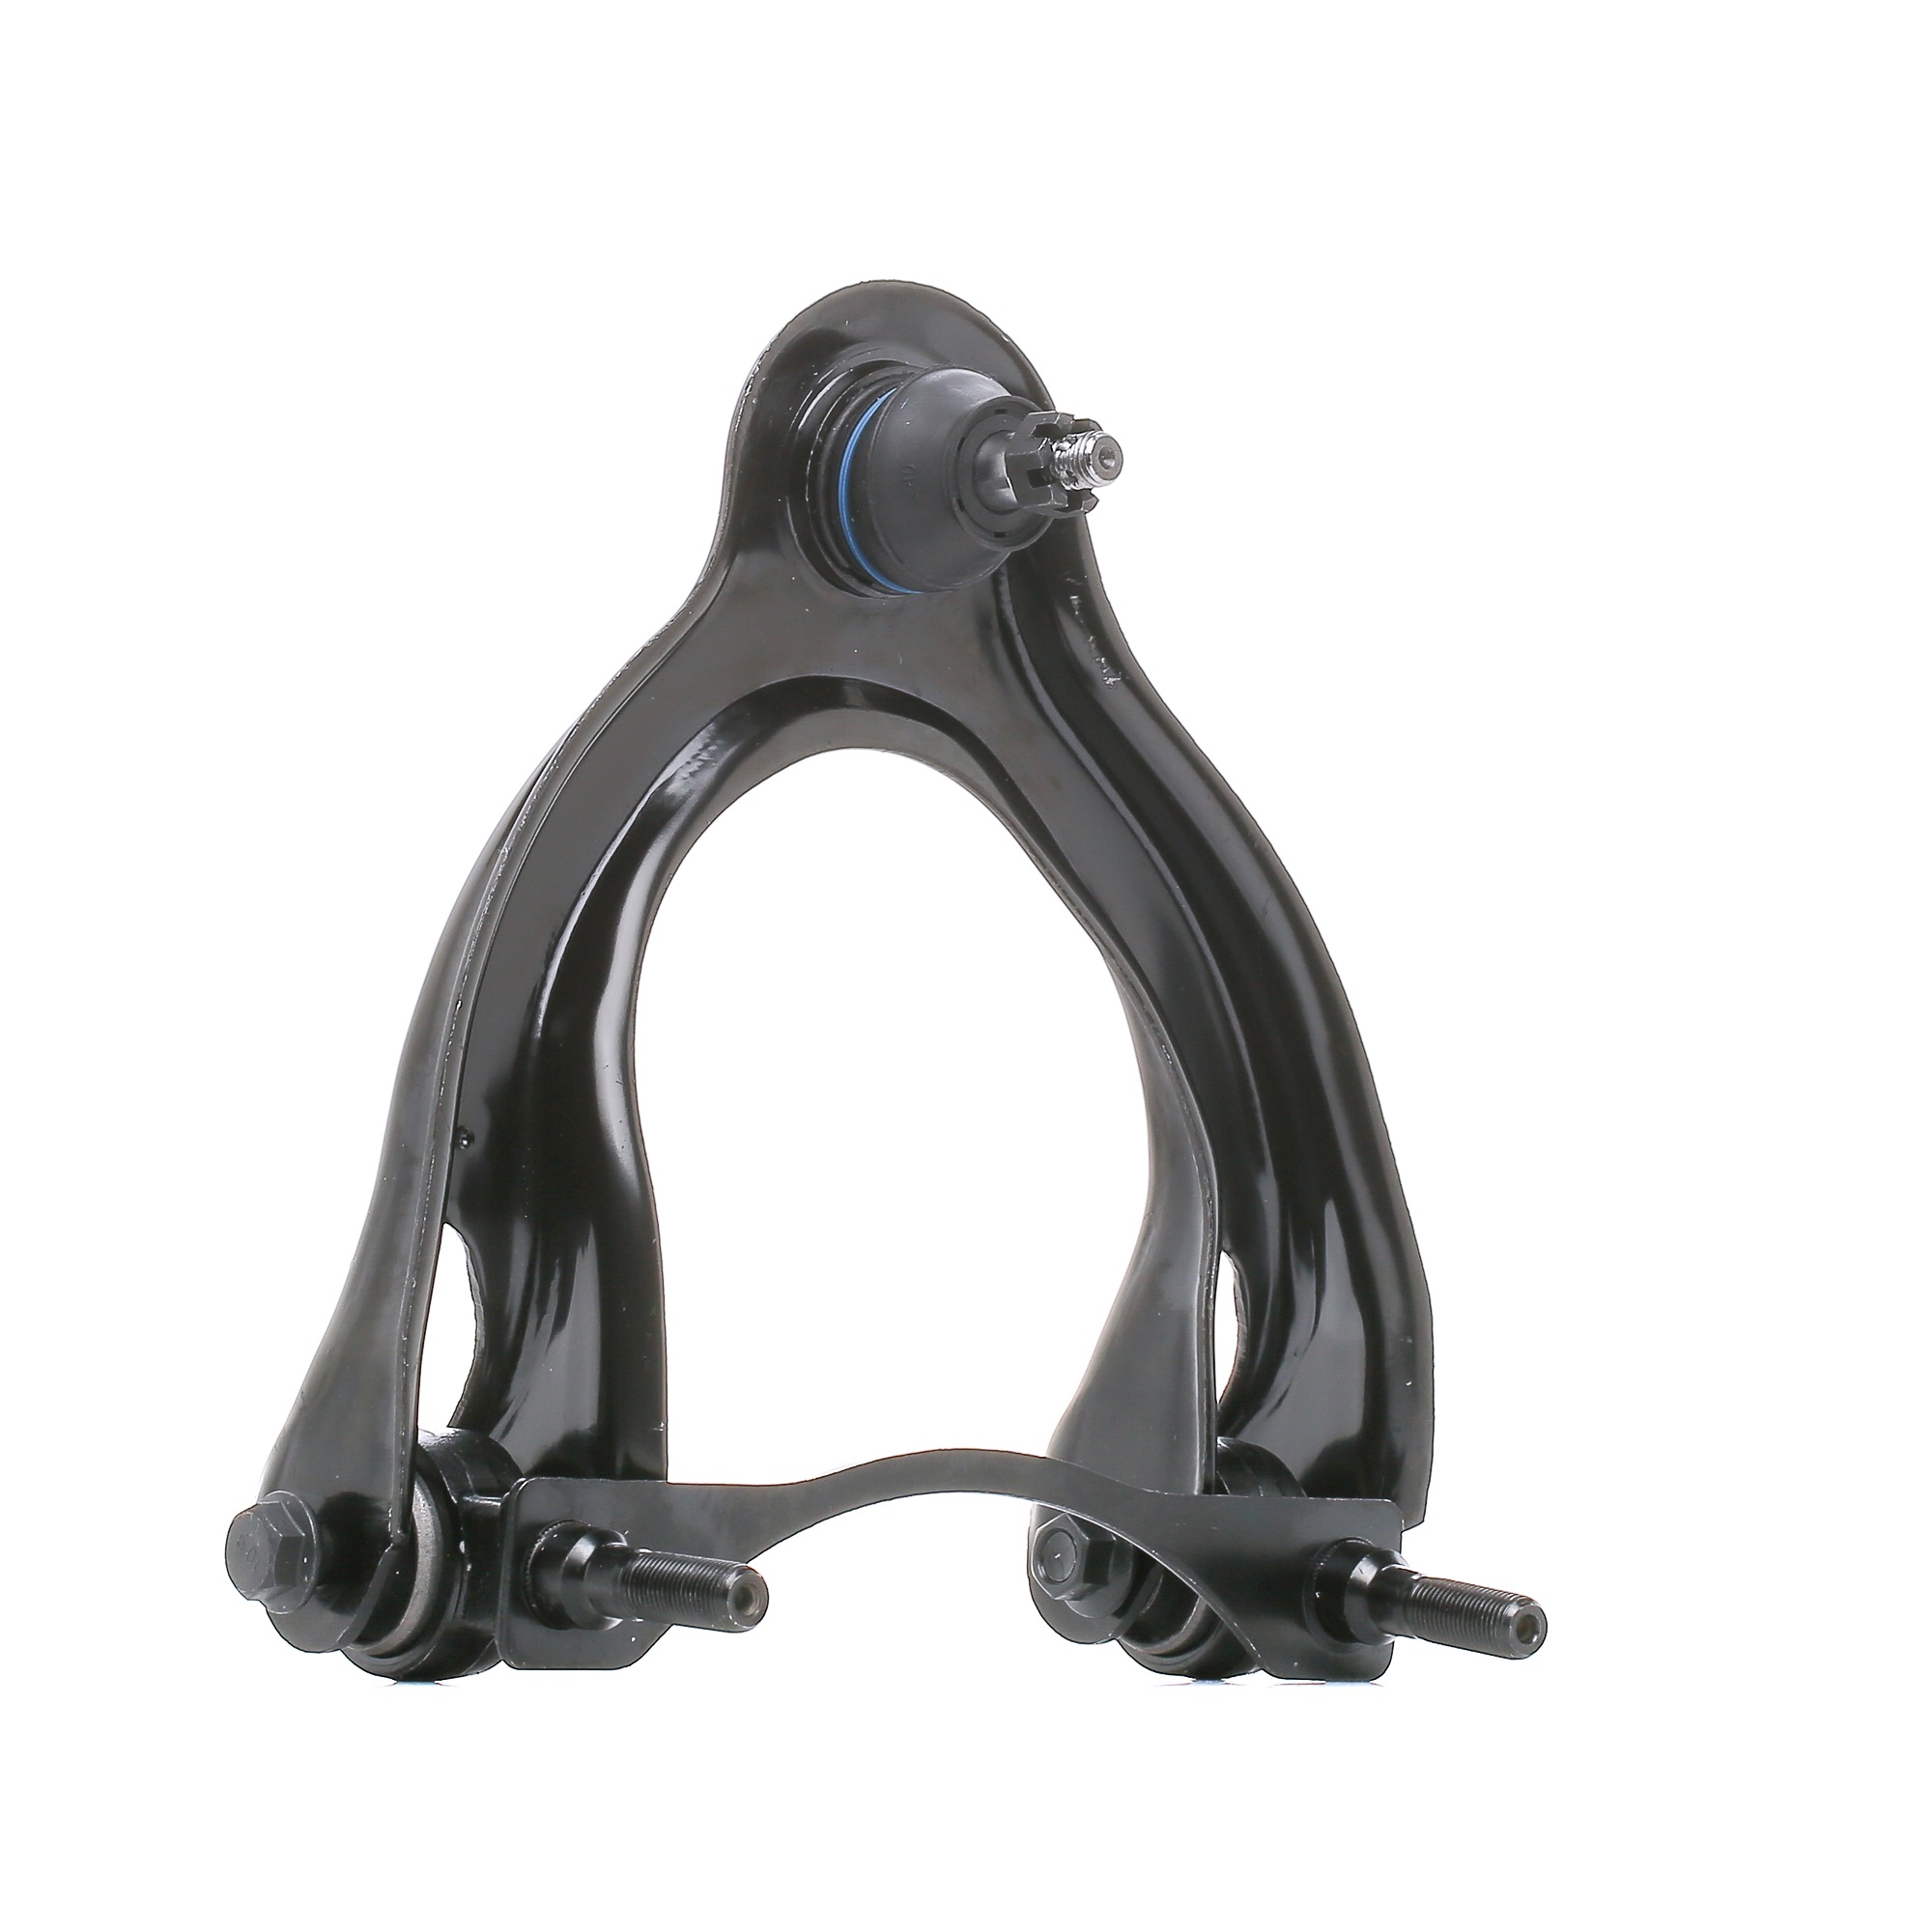 RIDEX 273C0270 Suspension arm with accessories, Front, Control Arm, Cone Size: 13 mm